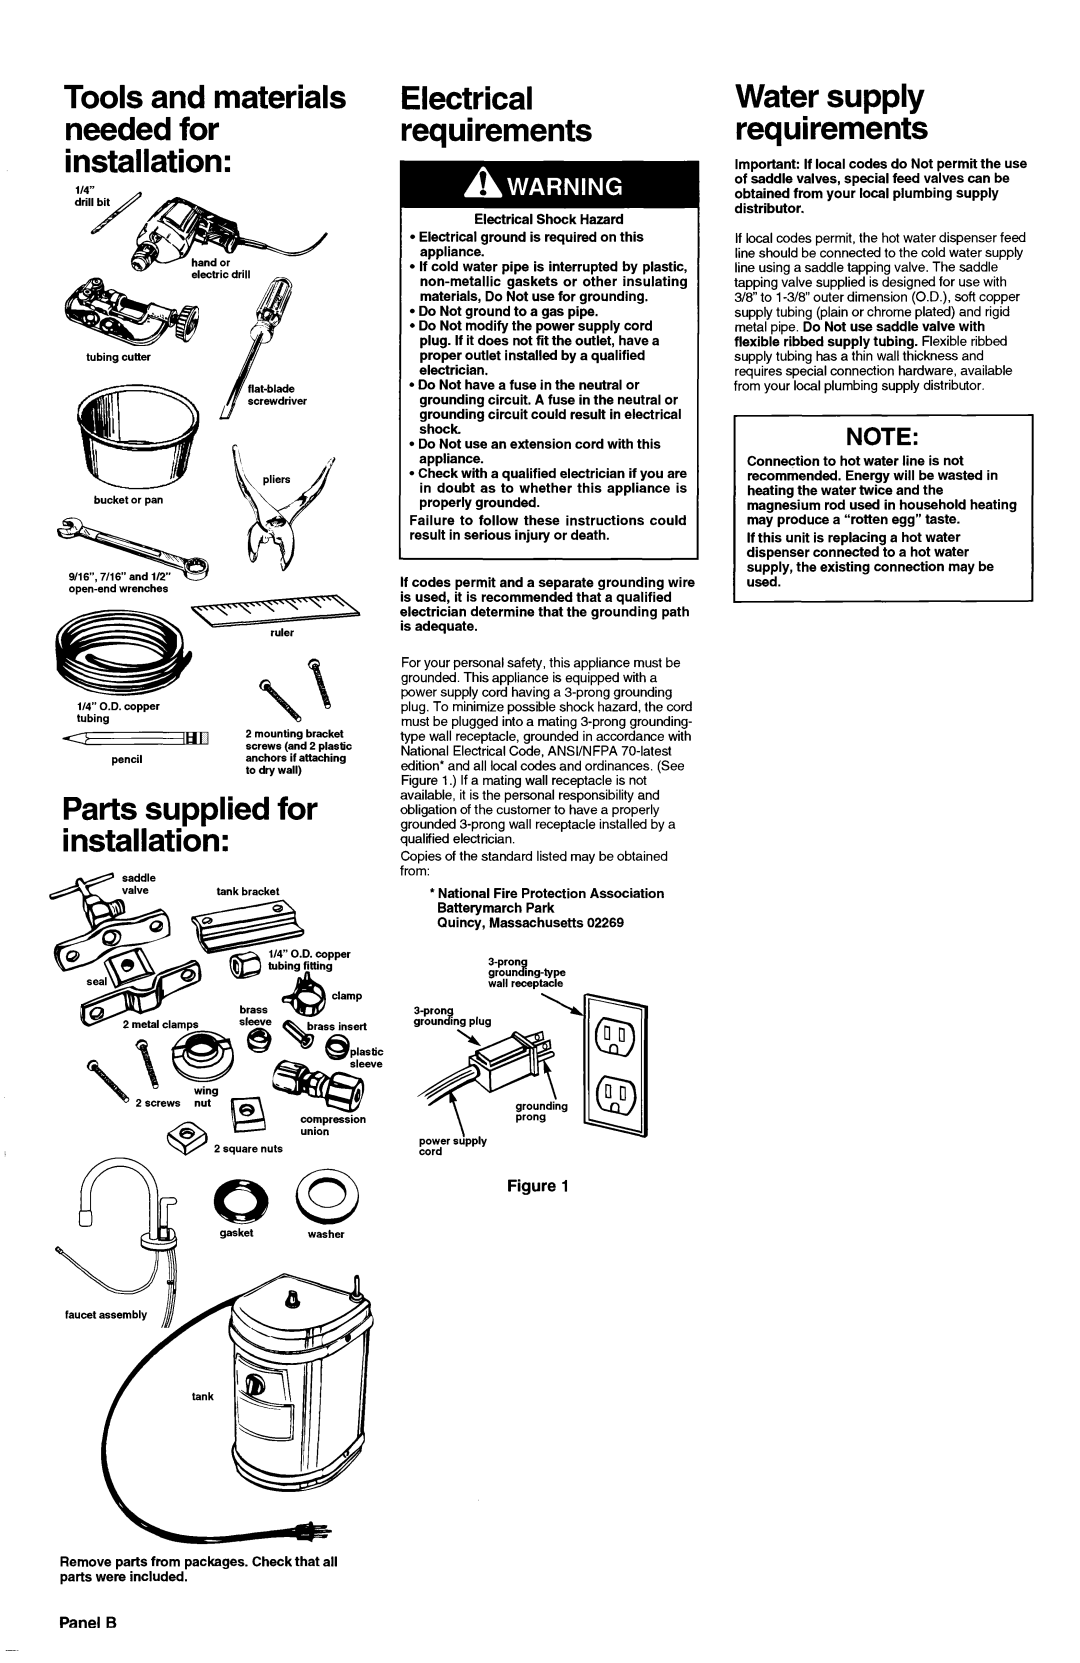 KitchenAid 3184330 Tools and materials needed for installation, Parts supplied for installation, Panel B 